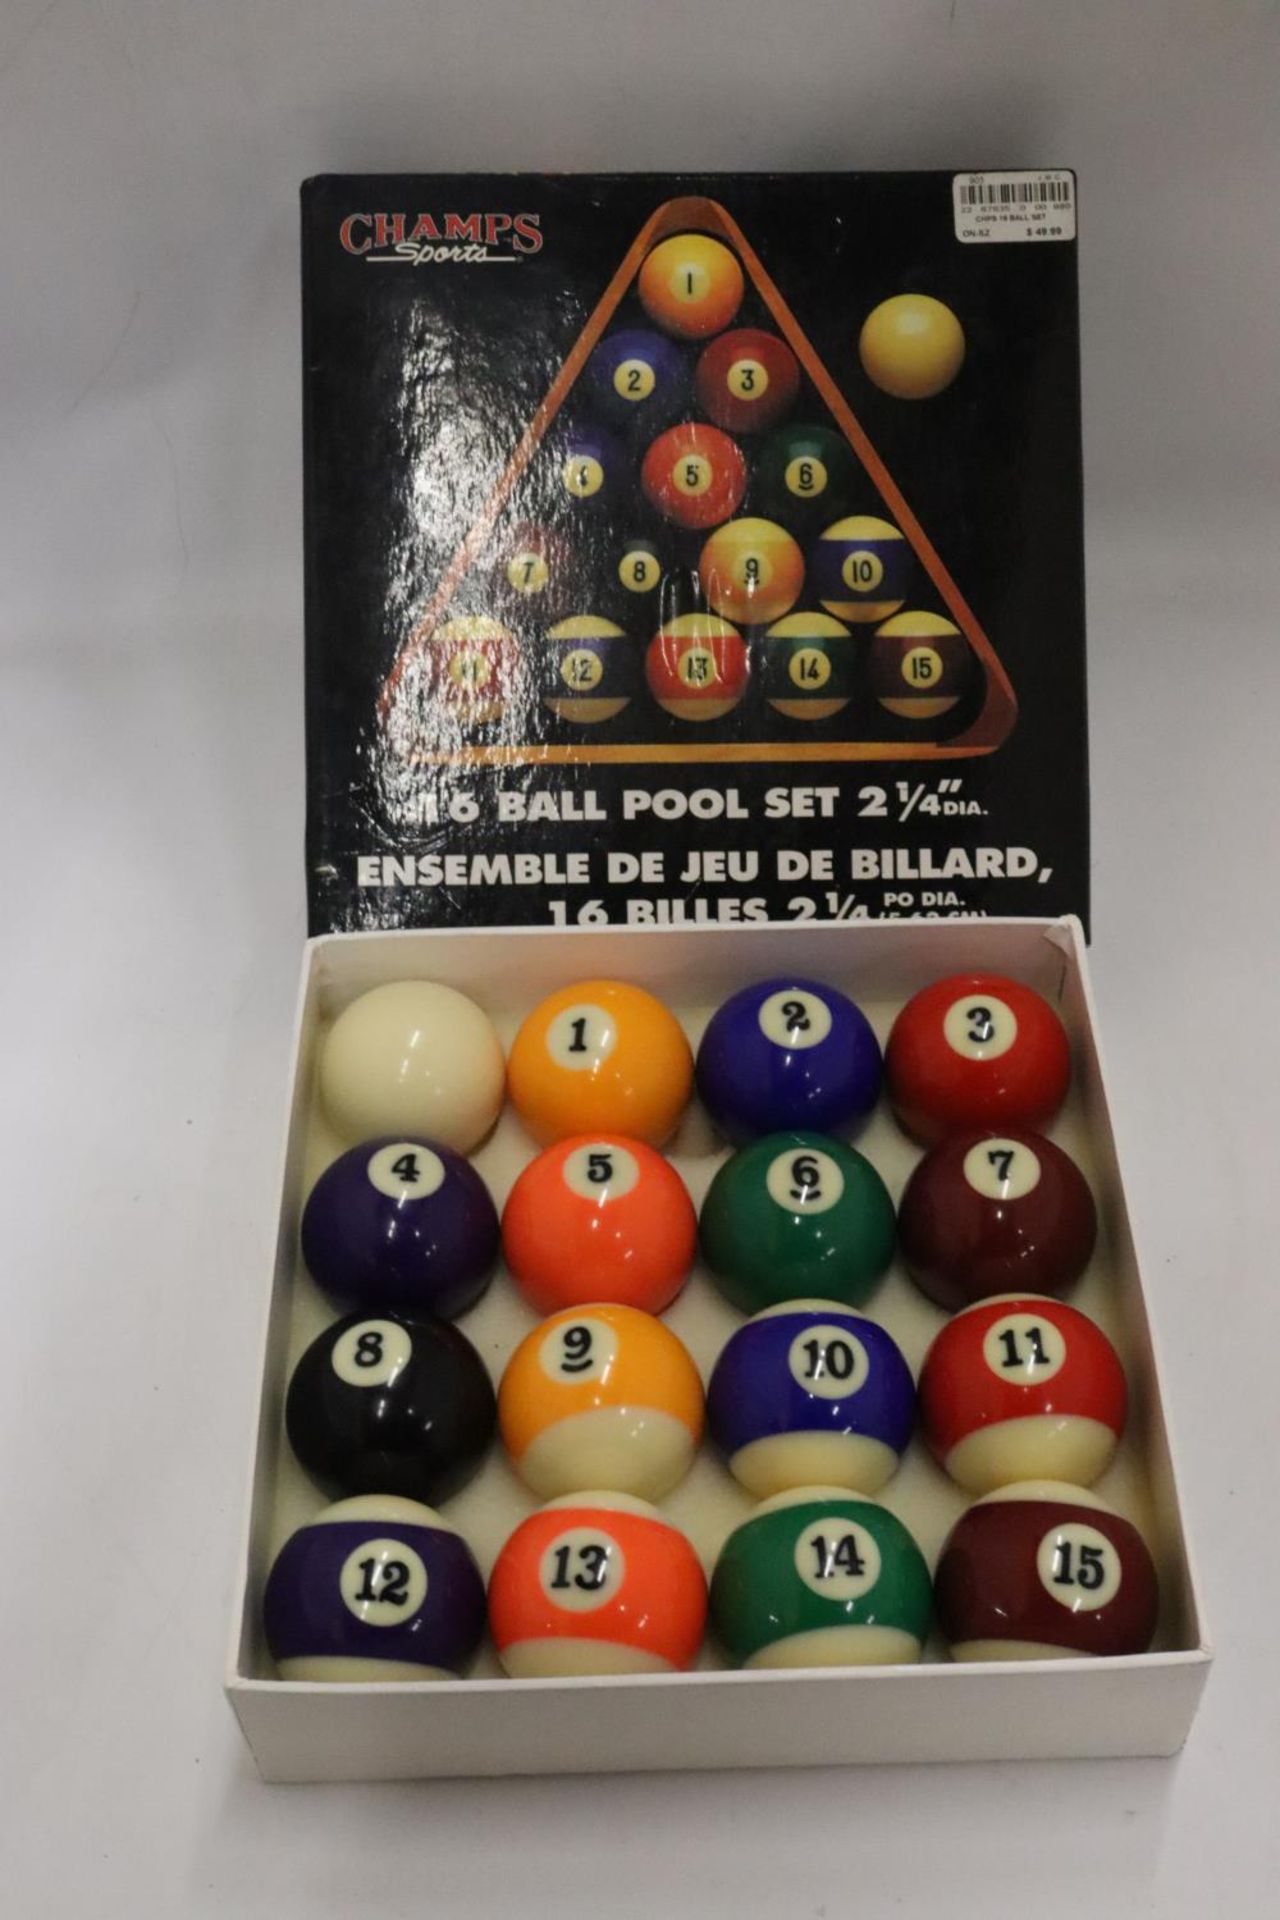 A CHAMPS SPORTS 16 BOWL POOL SET - Image 2 of 3